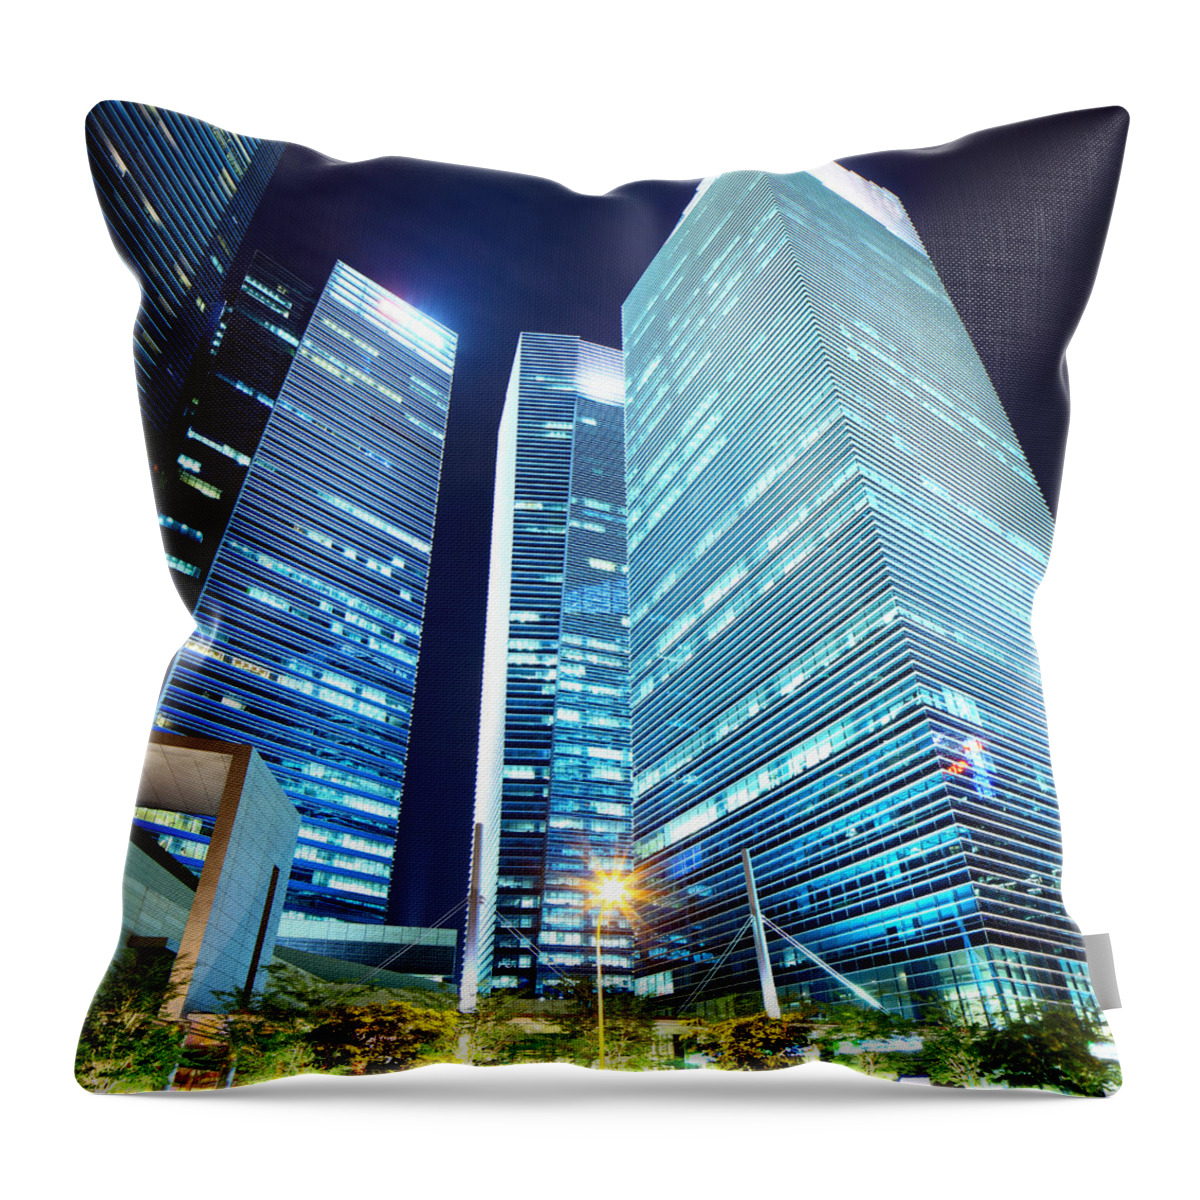 Financial Building Throw Pillow featuring the photograph Singapore Business Building At Night by Ngkaki